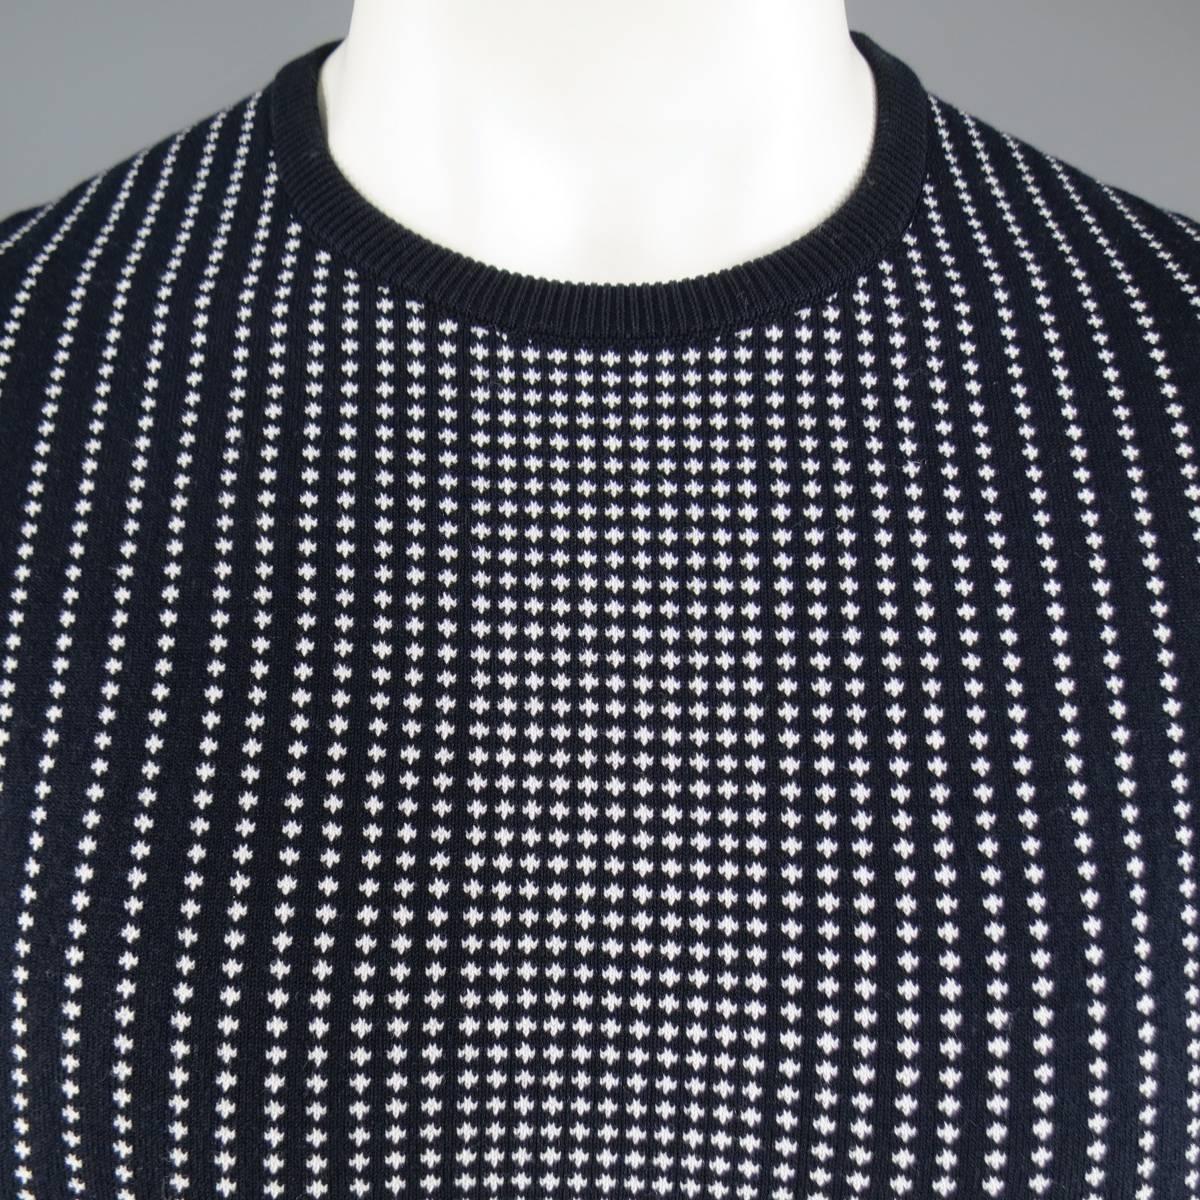 Chic JIL SANDER pullover sweater in a deep navy blue stretch cotton knit featuring a ribbed crew neck, short sleeves, and all over white spotted gradient pattern. Made in Italy.
Retails at $530.00.

New with Tags.
Marked: IT 50
 
Measurements:
